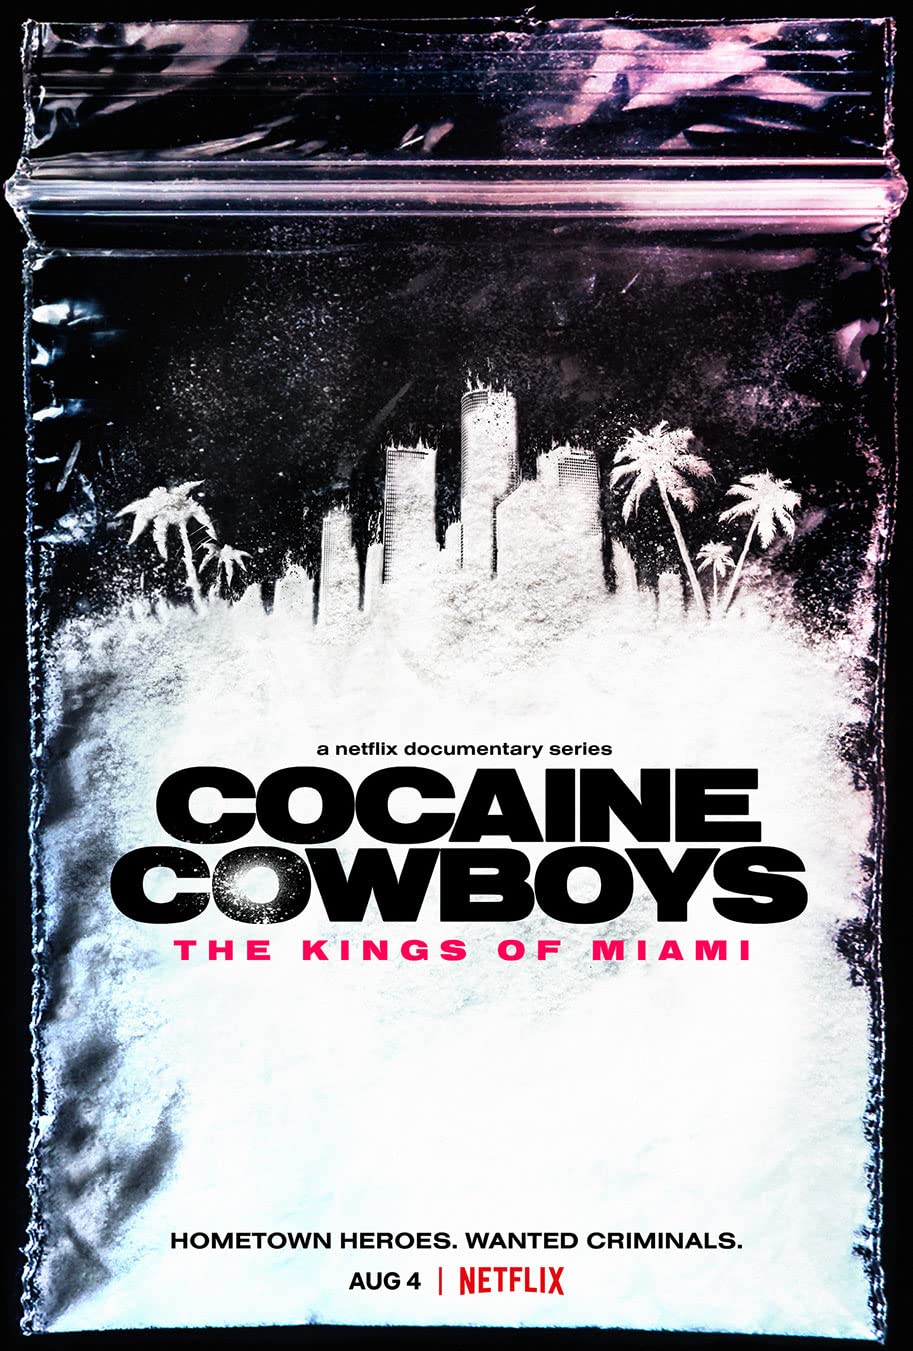 Netflix Cocaine Cowboys The Kings Of Miami Trailer, Coming to Netflix in August 2021